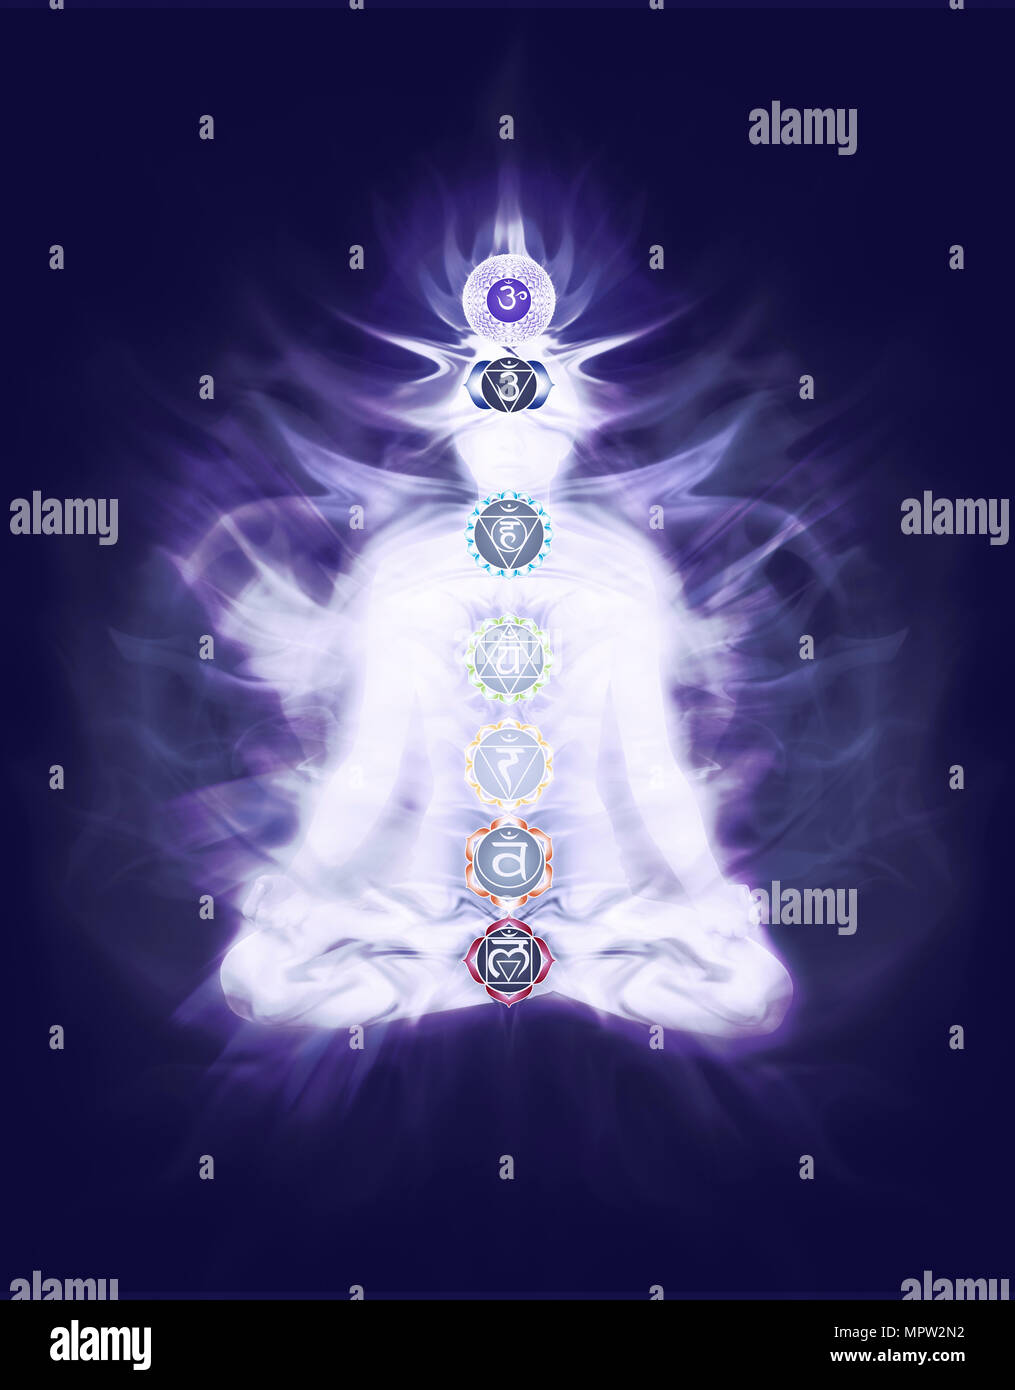 Woman sitting in Yoga meditation lotus pose with colored chakra symbols and emanating Qi energy overlayed on the body on dark navy blue purple color b Stock Photo